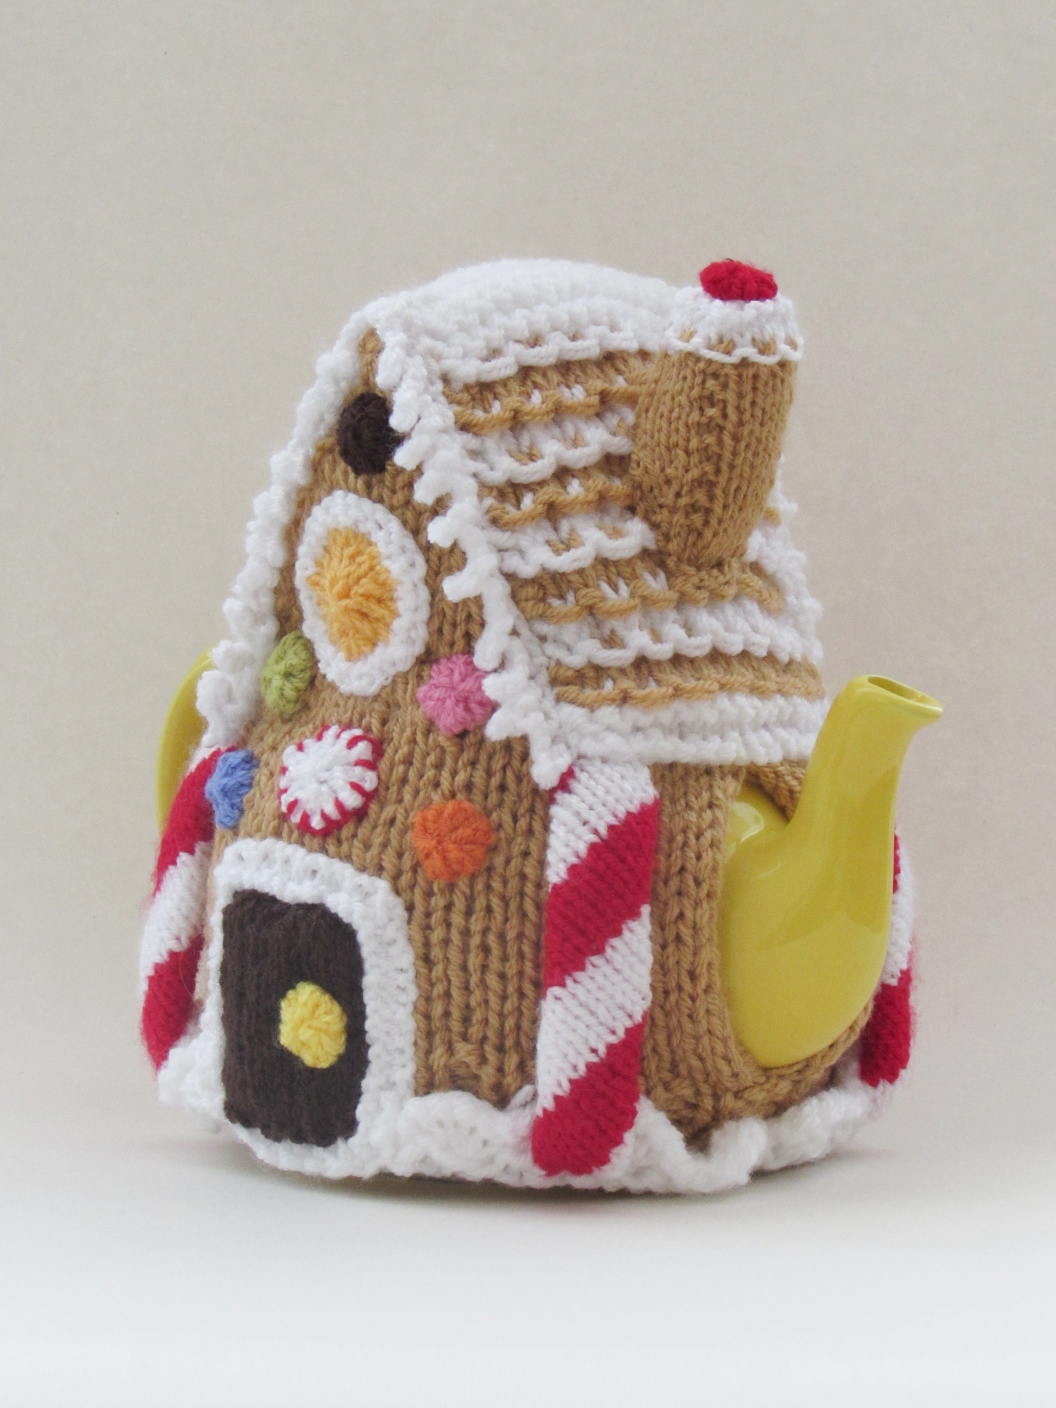 Gingerbread House knitting pattern